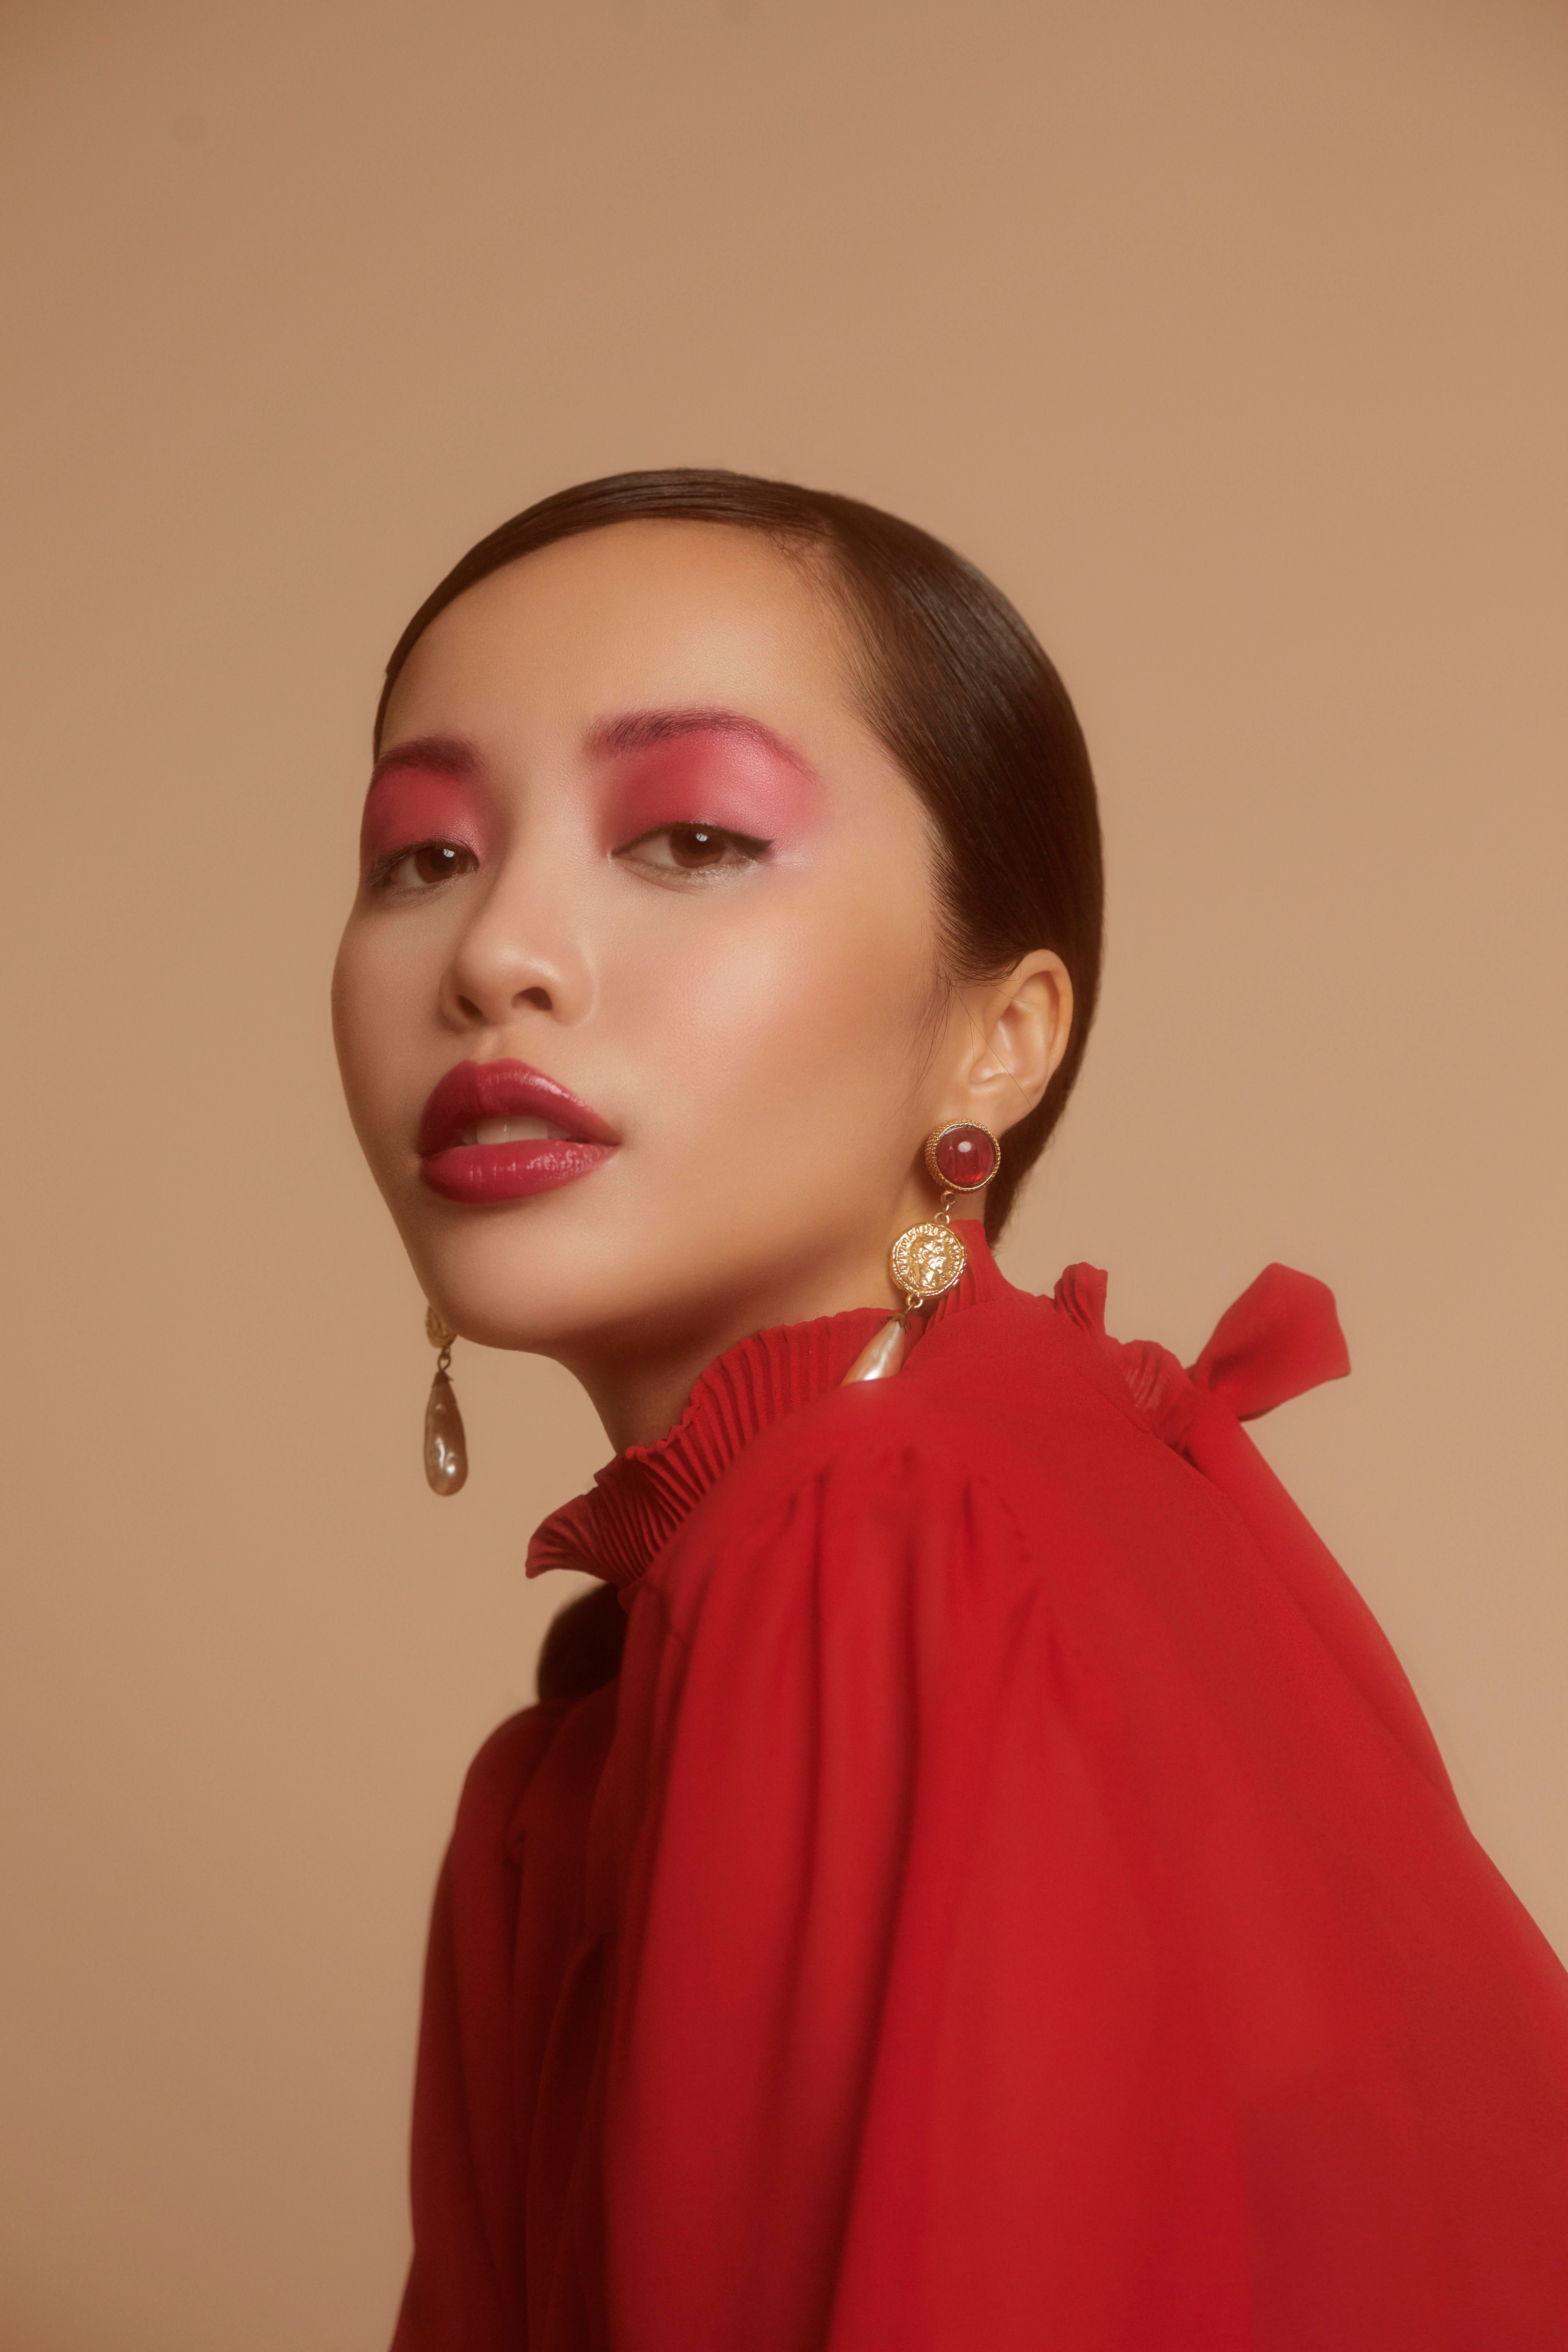 Michelle Phan Youtube Beauty Star On Why She Left